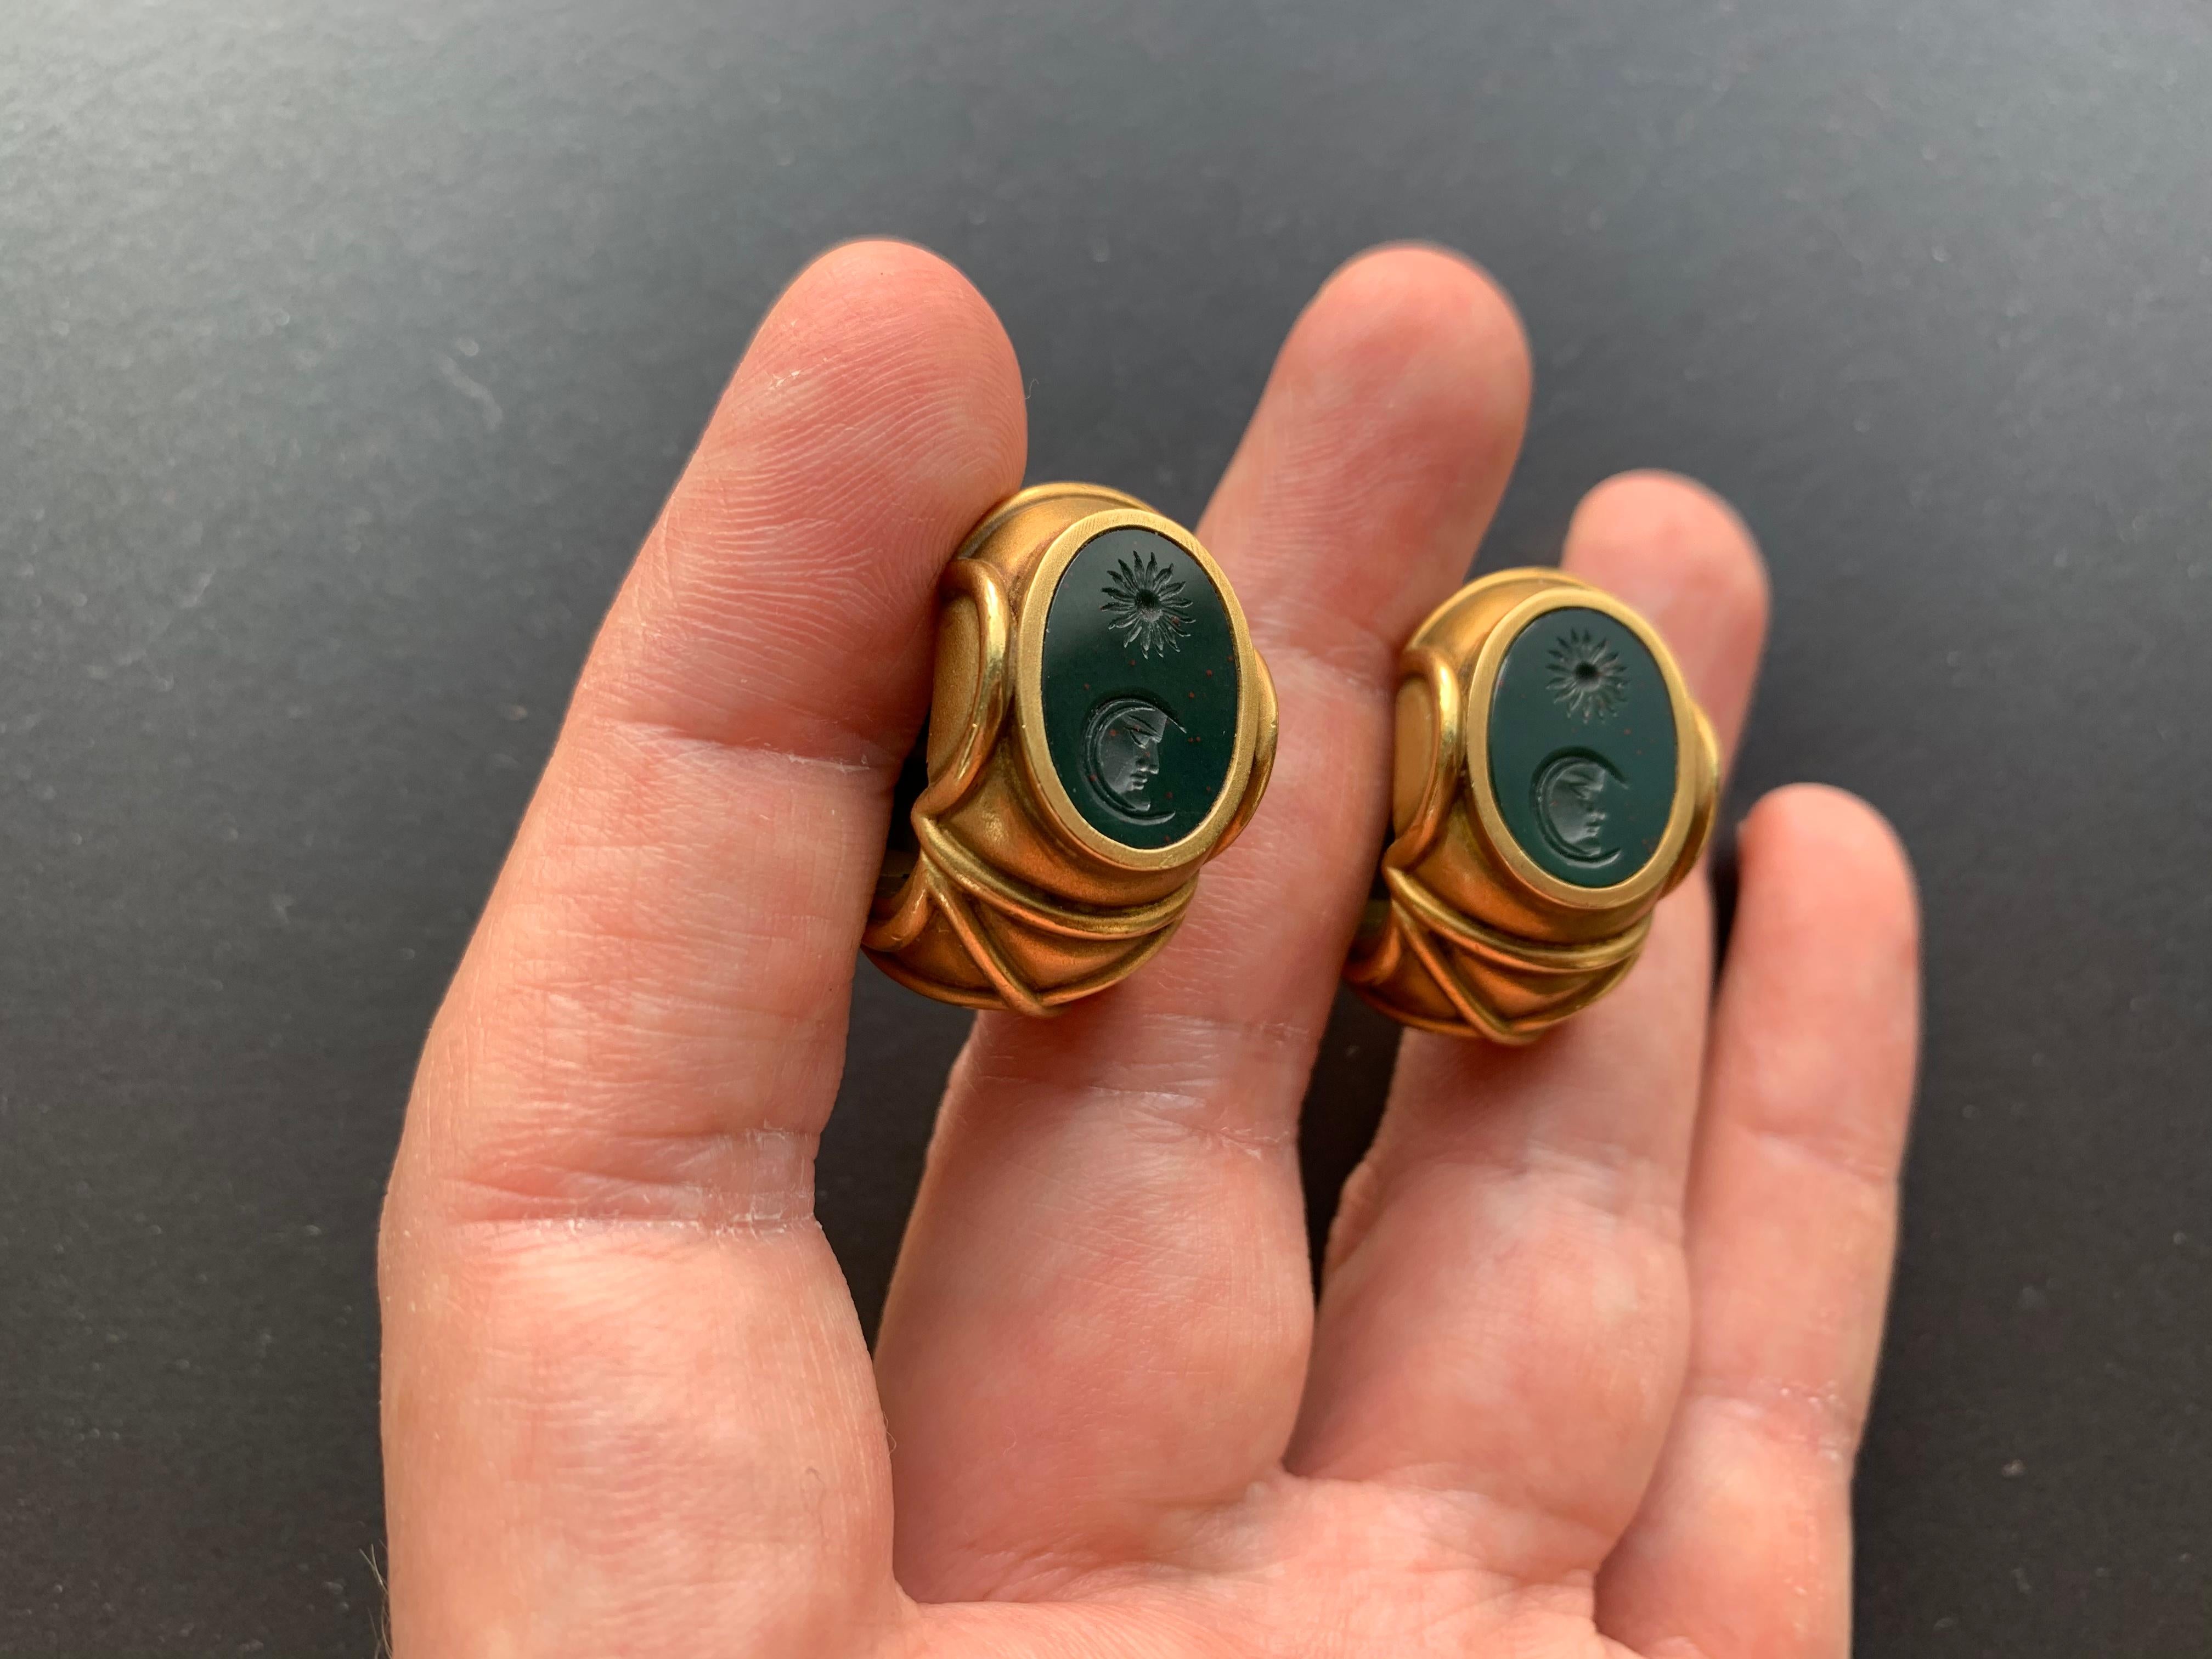 Barry Kieselstein-Cord Earrings 

With carved bloodstone intaglio Sun and Moon motif

18 karat gold

Made in 1990

Approx 1 in length

49.4 Grams